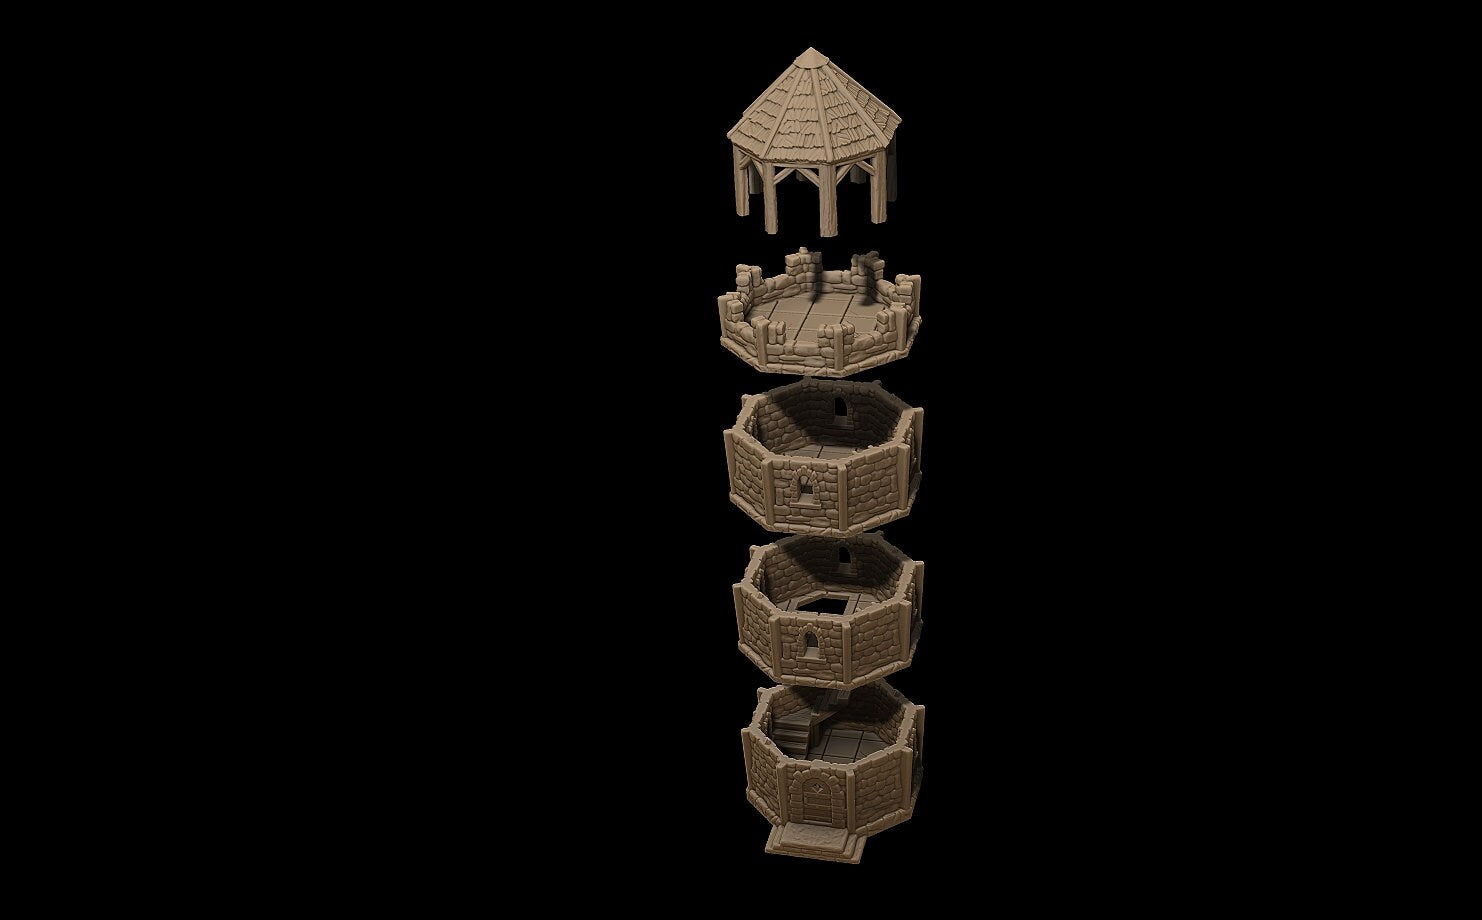 Guard Tower, Guard, Tower, Watch Tower, Guard Post, Blacksmith, forge, Smithy,Stormhill, city set, town set, House, Terrain, Tabletop, Tabletop Terrain, Tabletop Gaming, Dungeons and Dragons, Wargaming, DnD, D&D, city, tabletop games